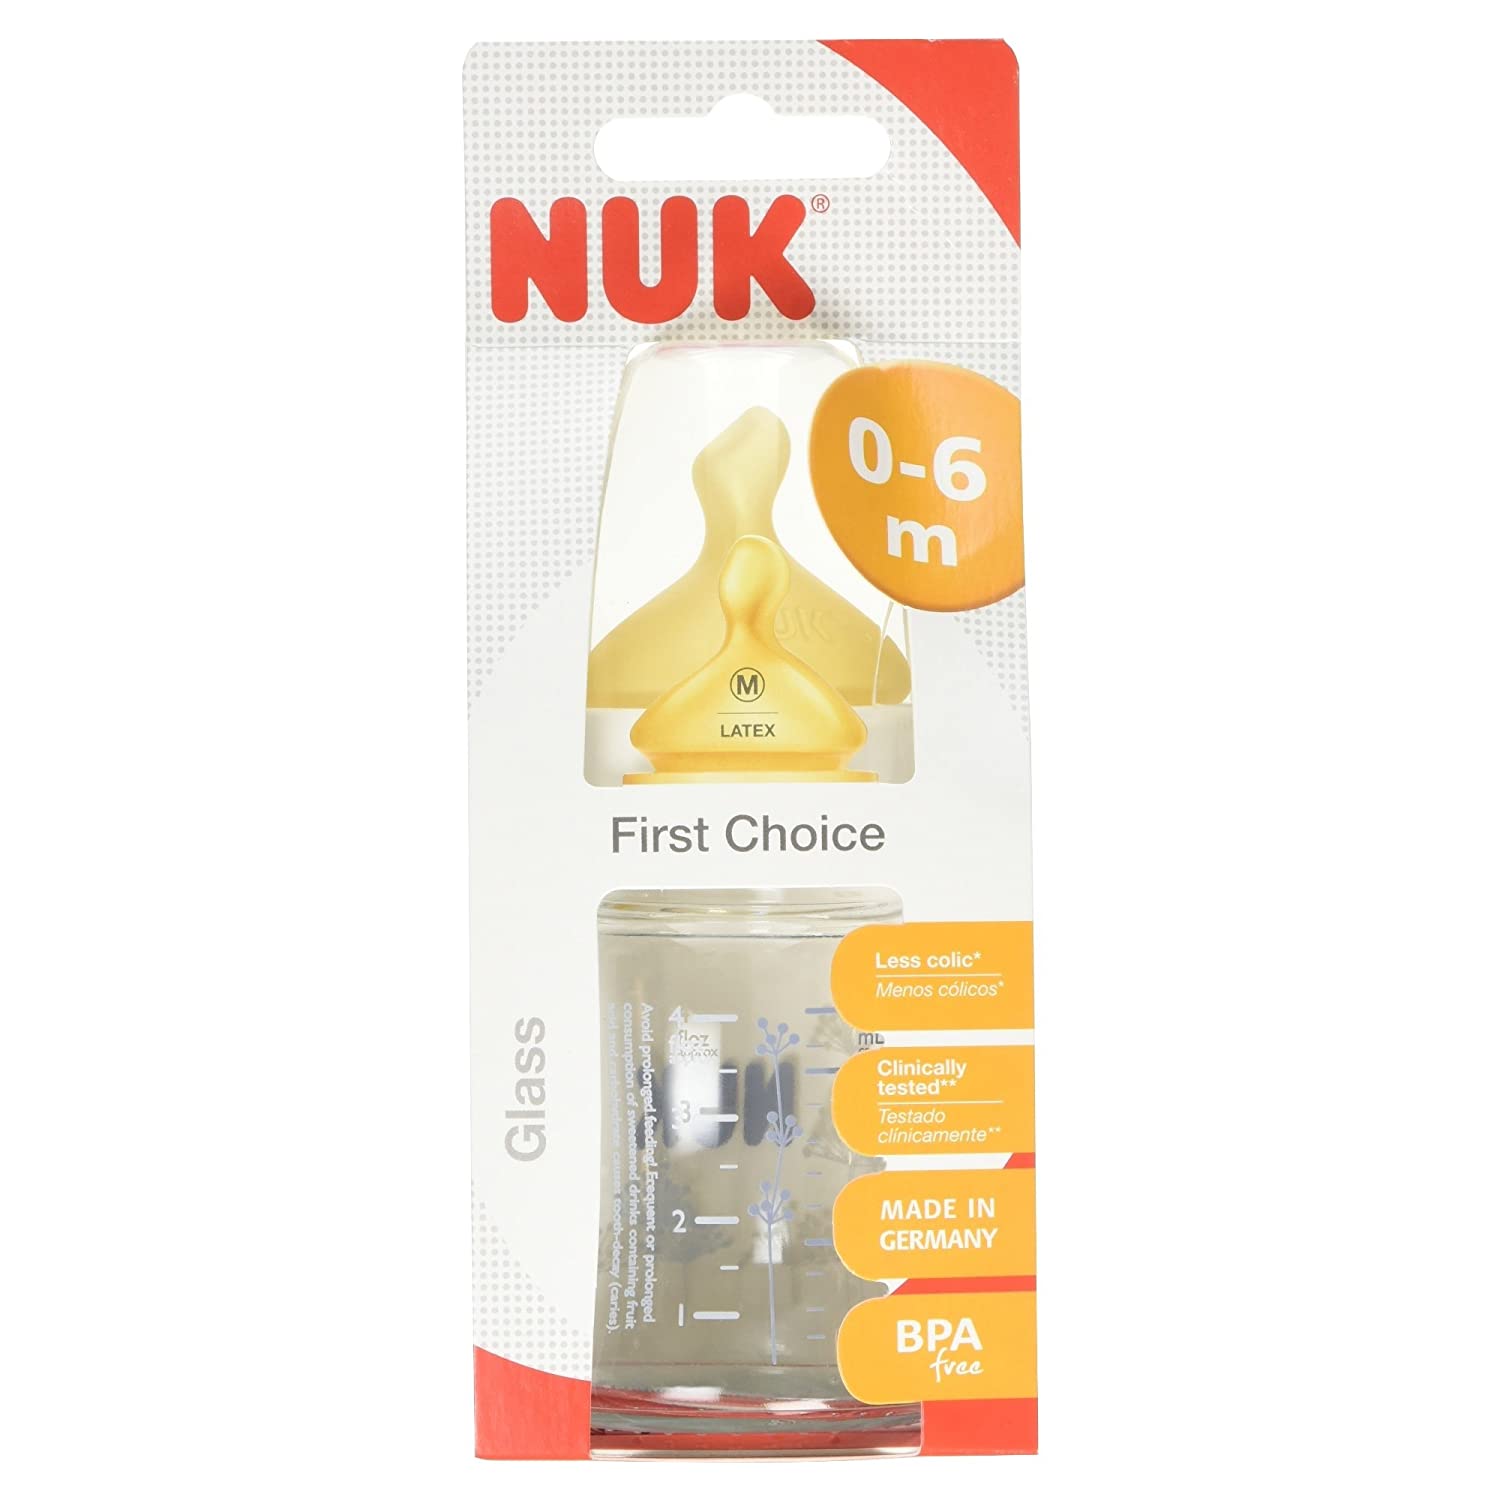 Nuk 26293 First Choice Glass Bottle with Latex Teat Blue